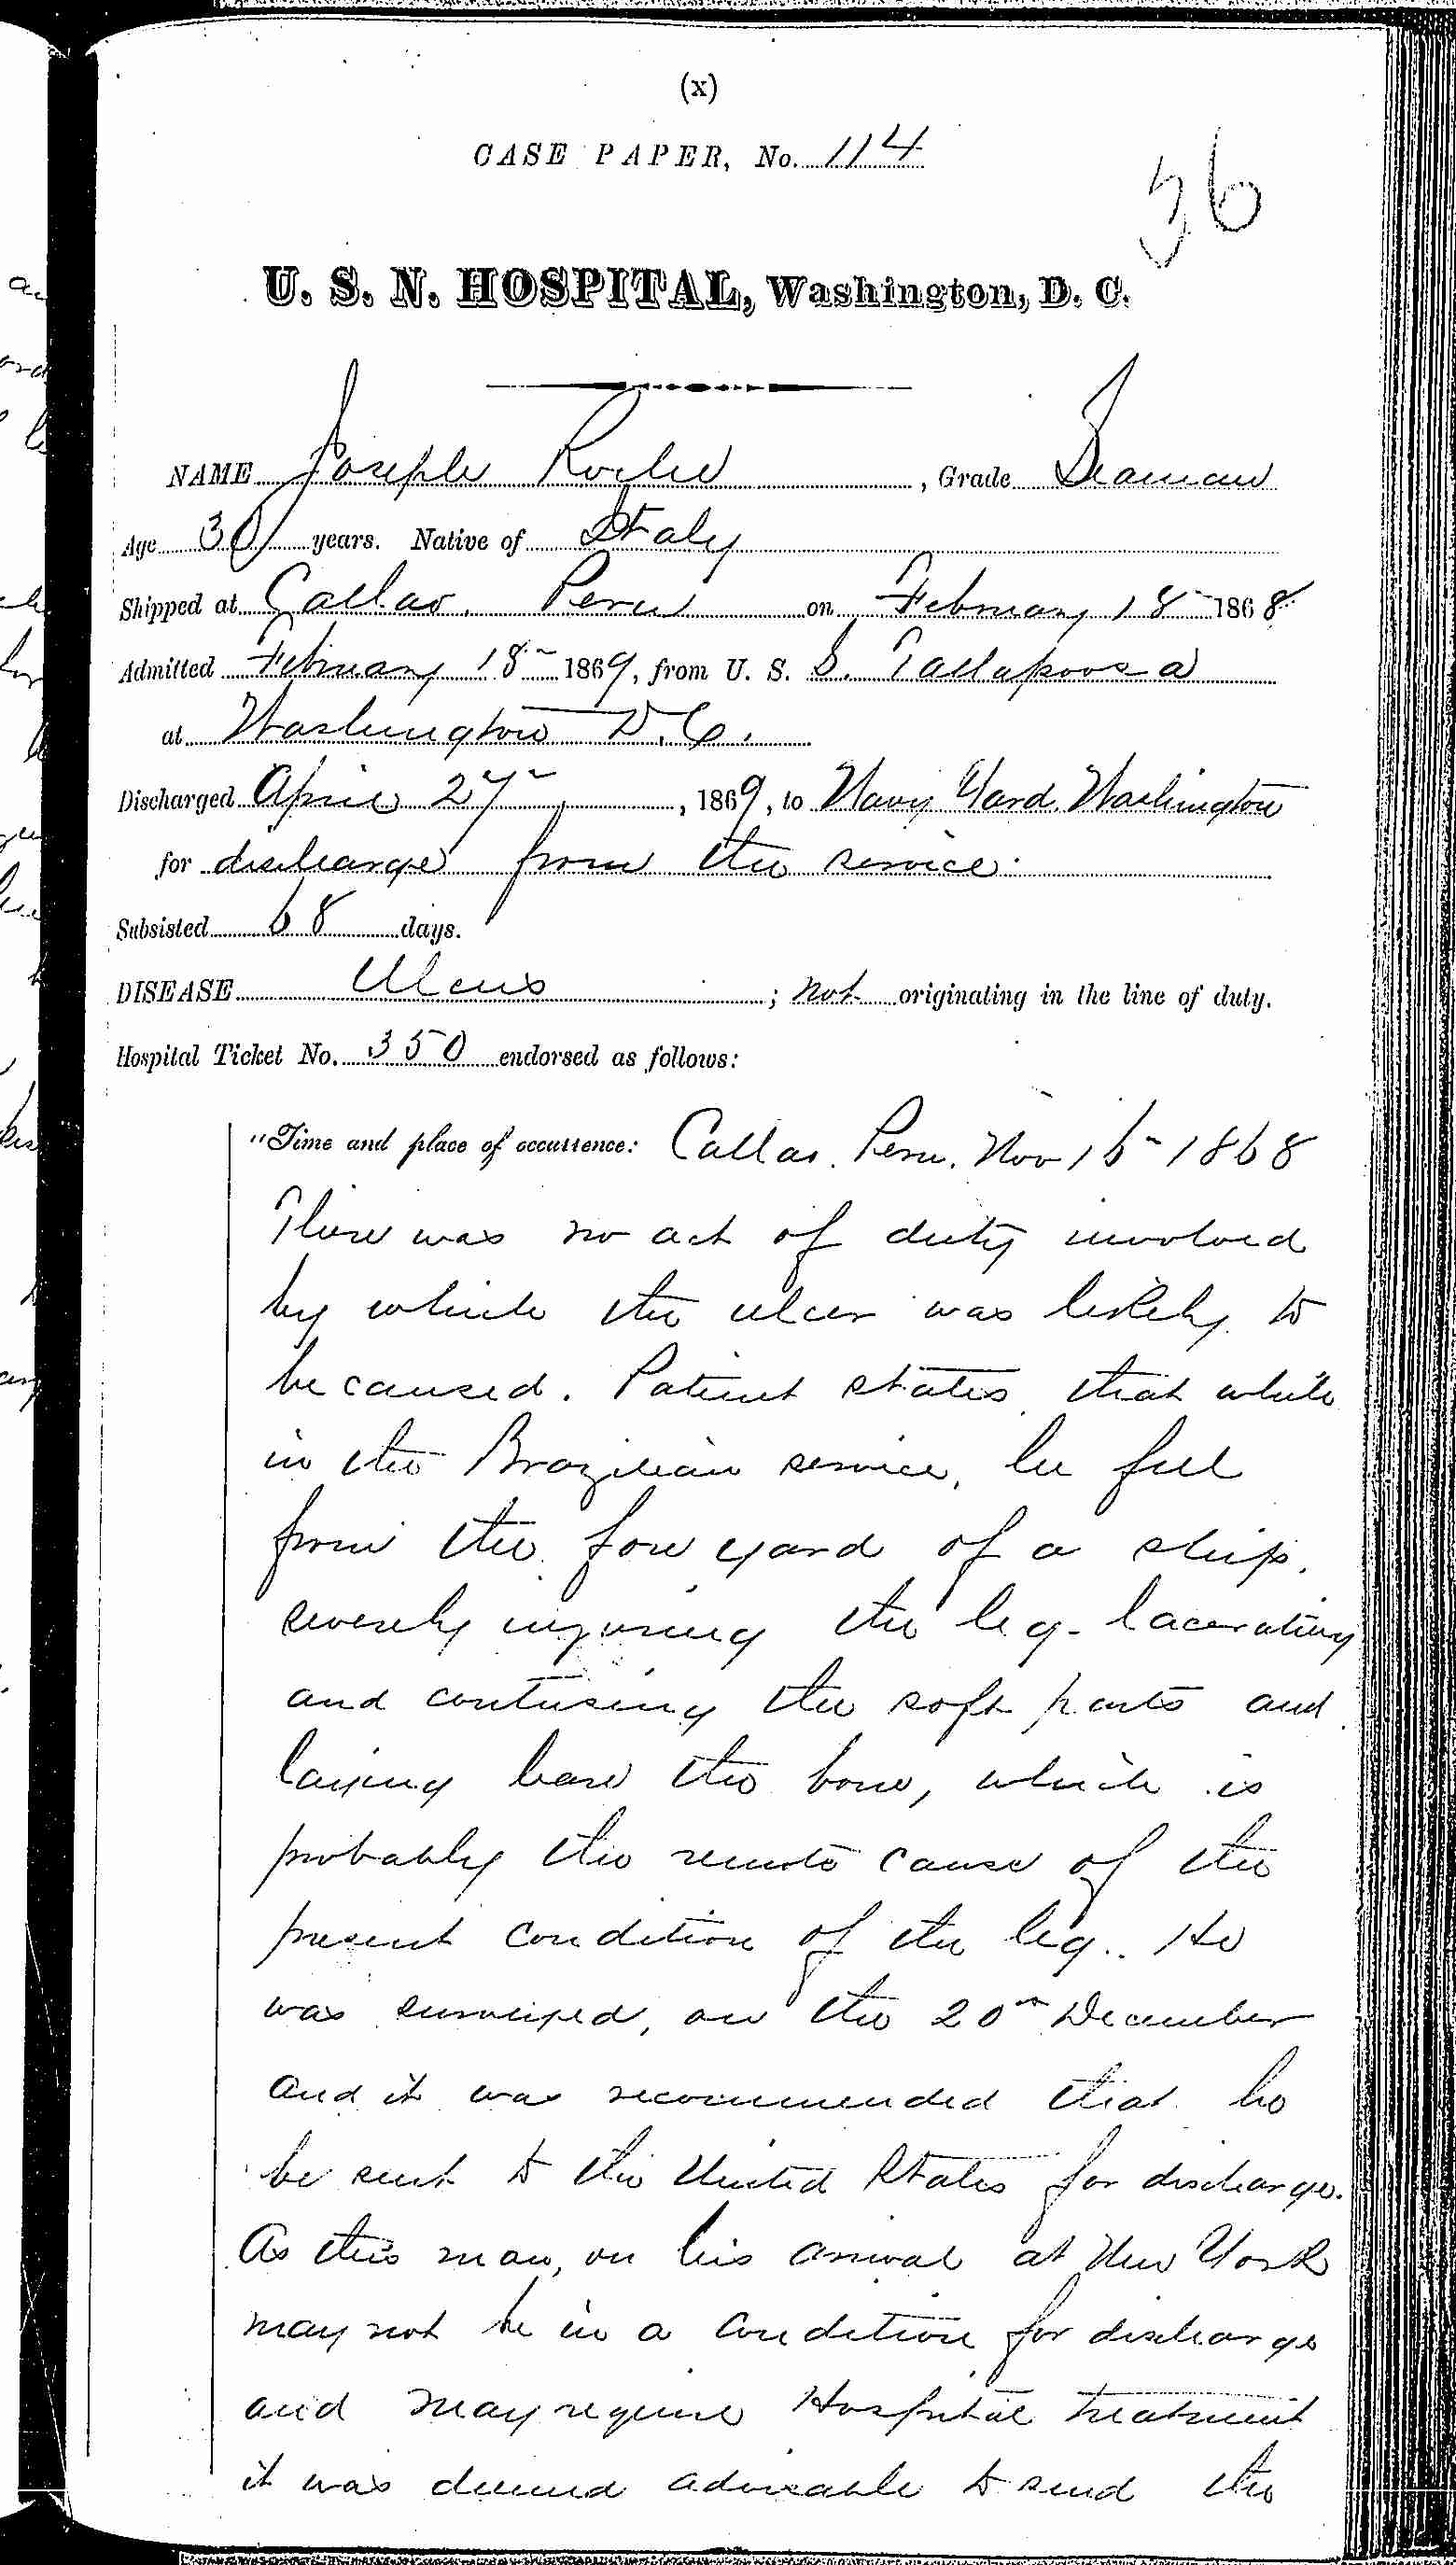 Entry for Joseph Poiler (page 1 of 3) in the log Hospital Tickets and Case Papers - Naval Hospital - Washington, D.C. - 1868-69